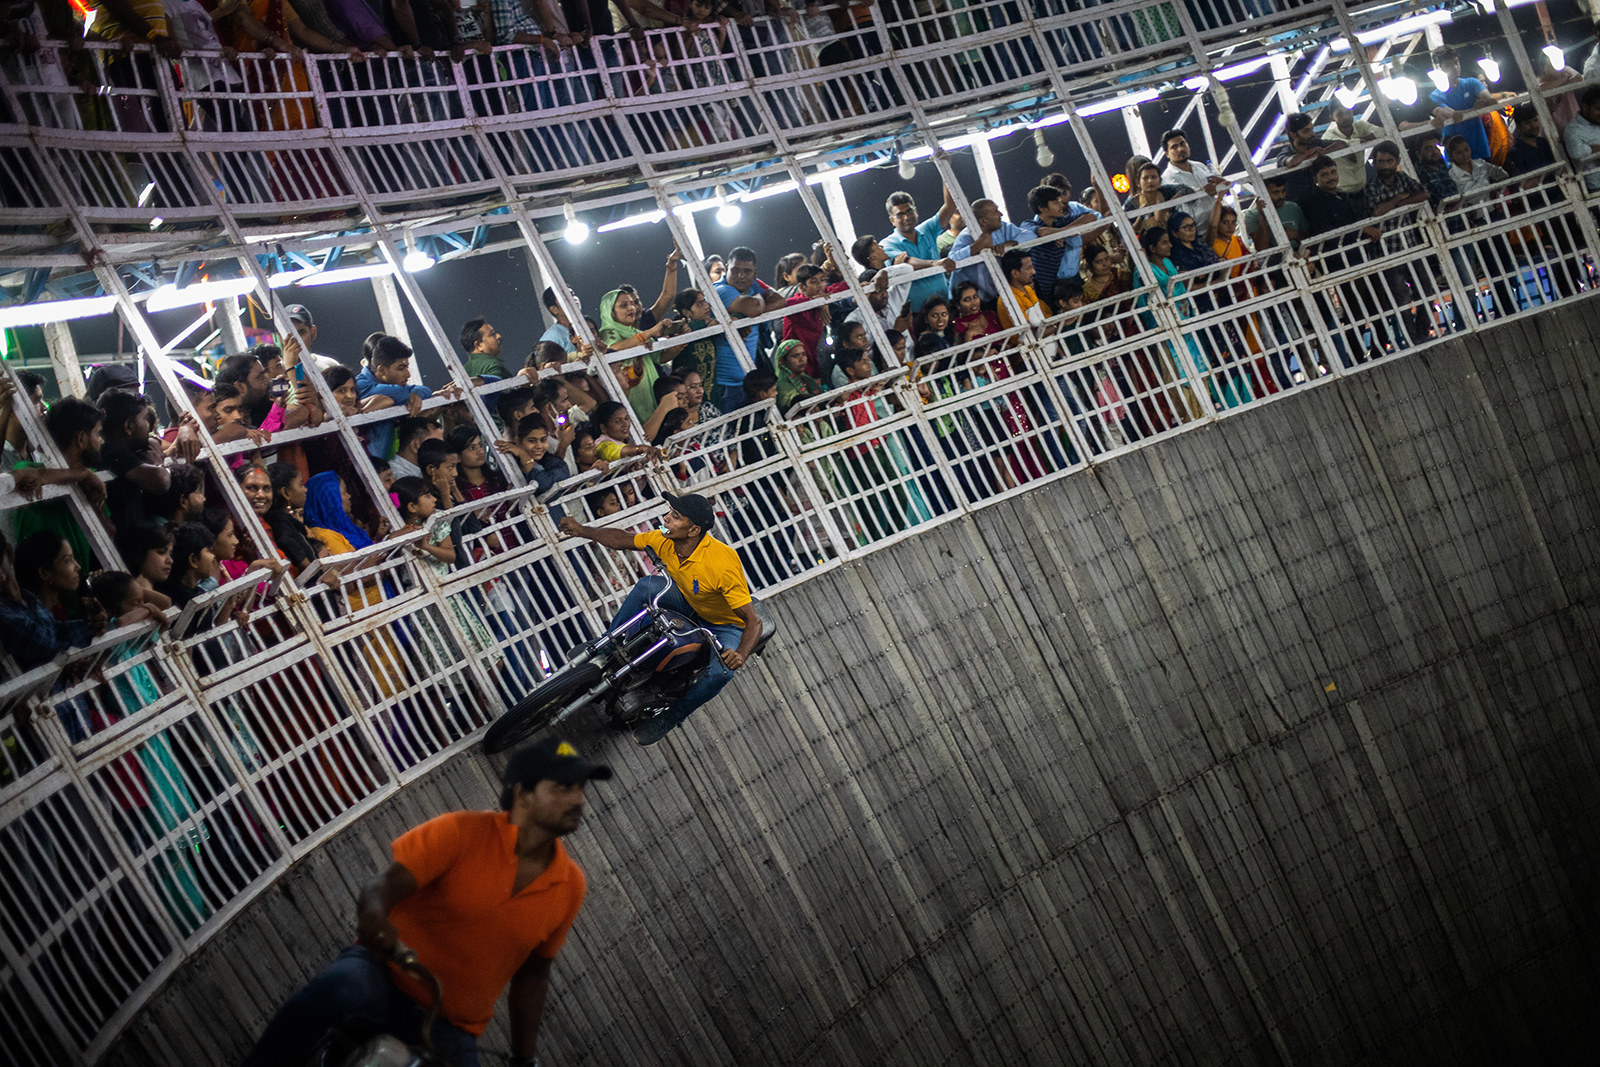 A man takes a tip from the audience as he drives on the top most area of the wooden cylindrical arena.